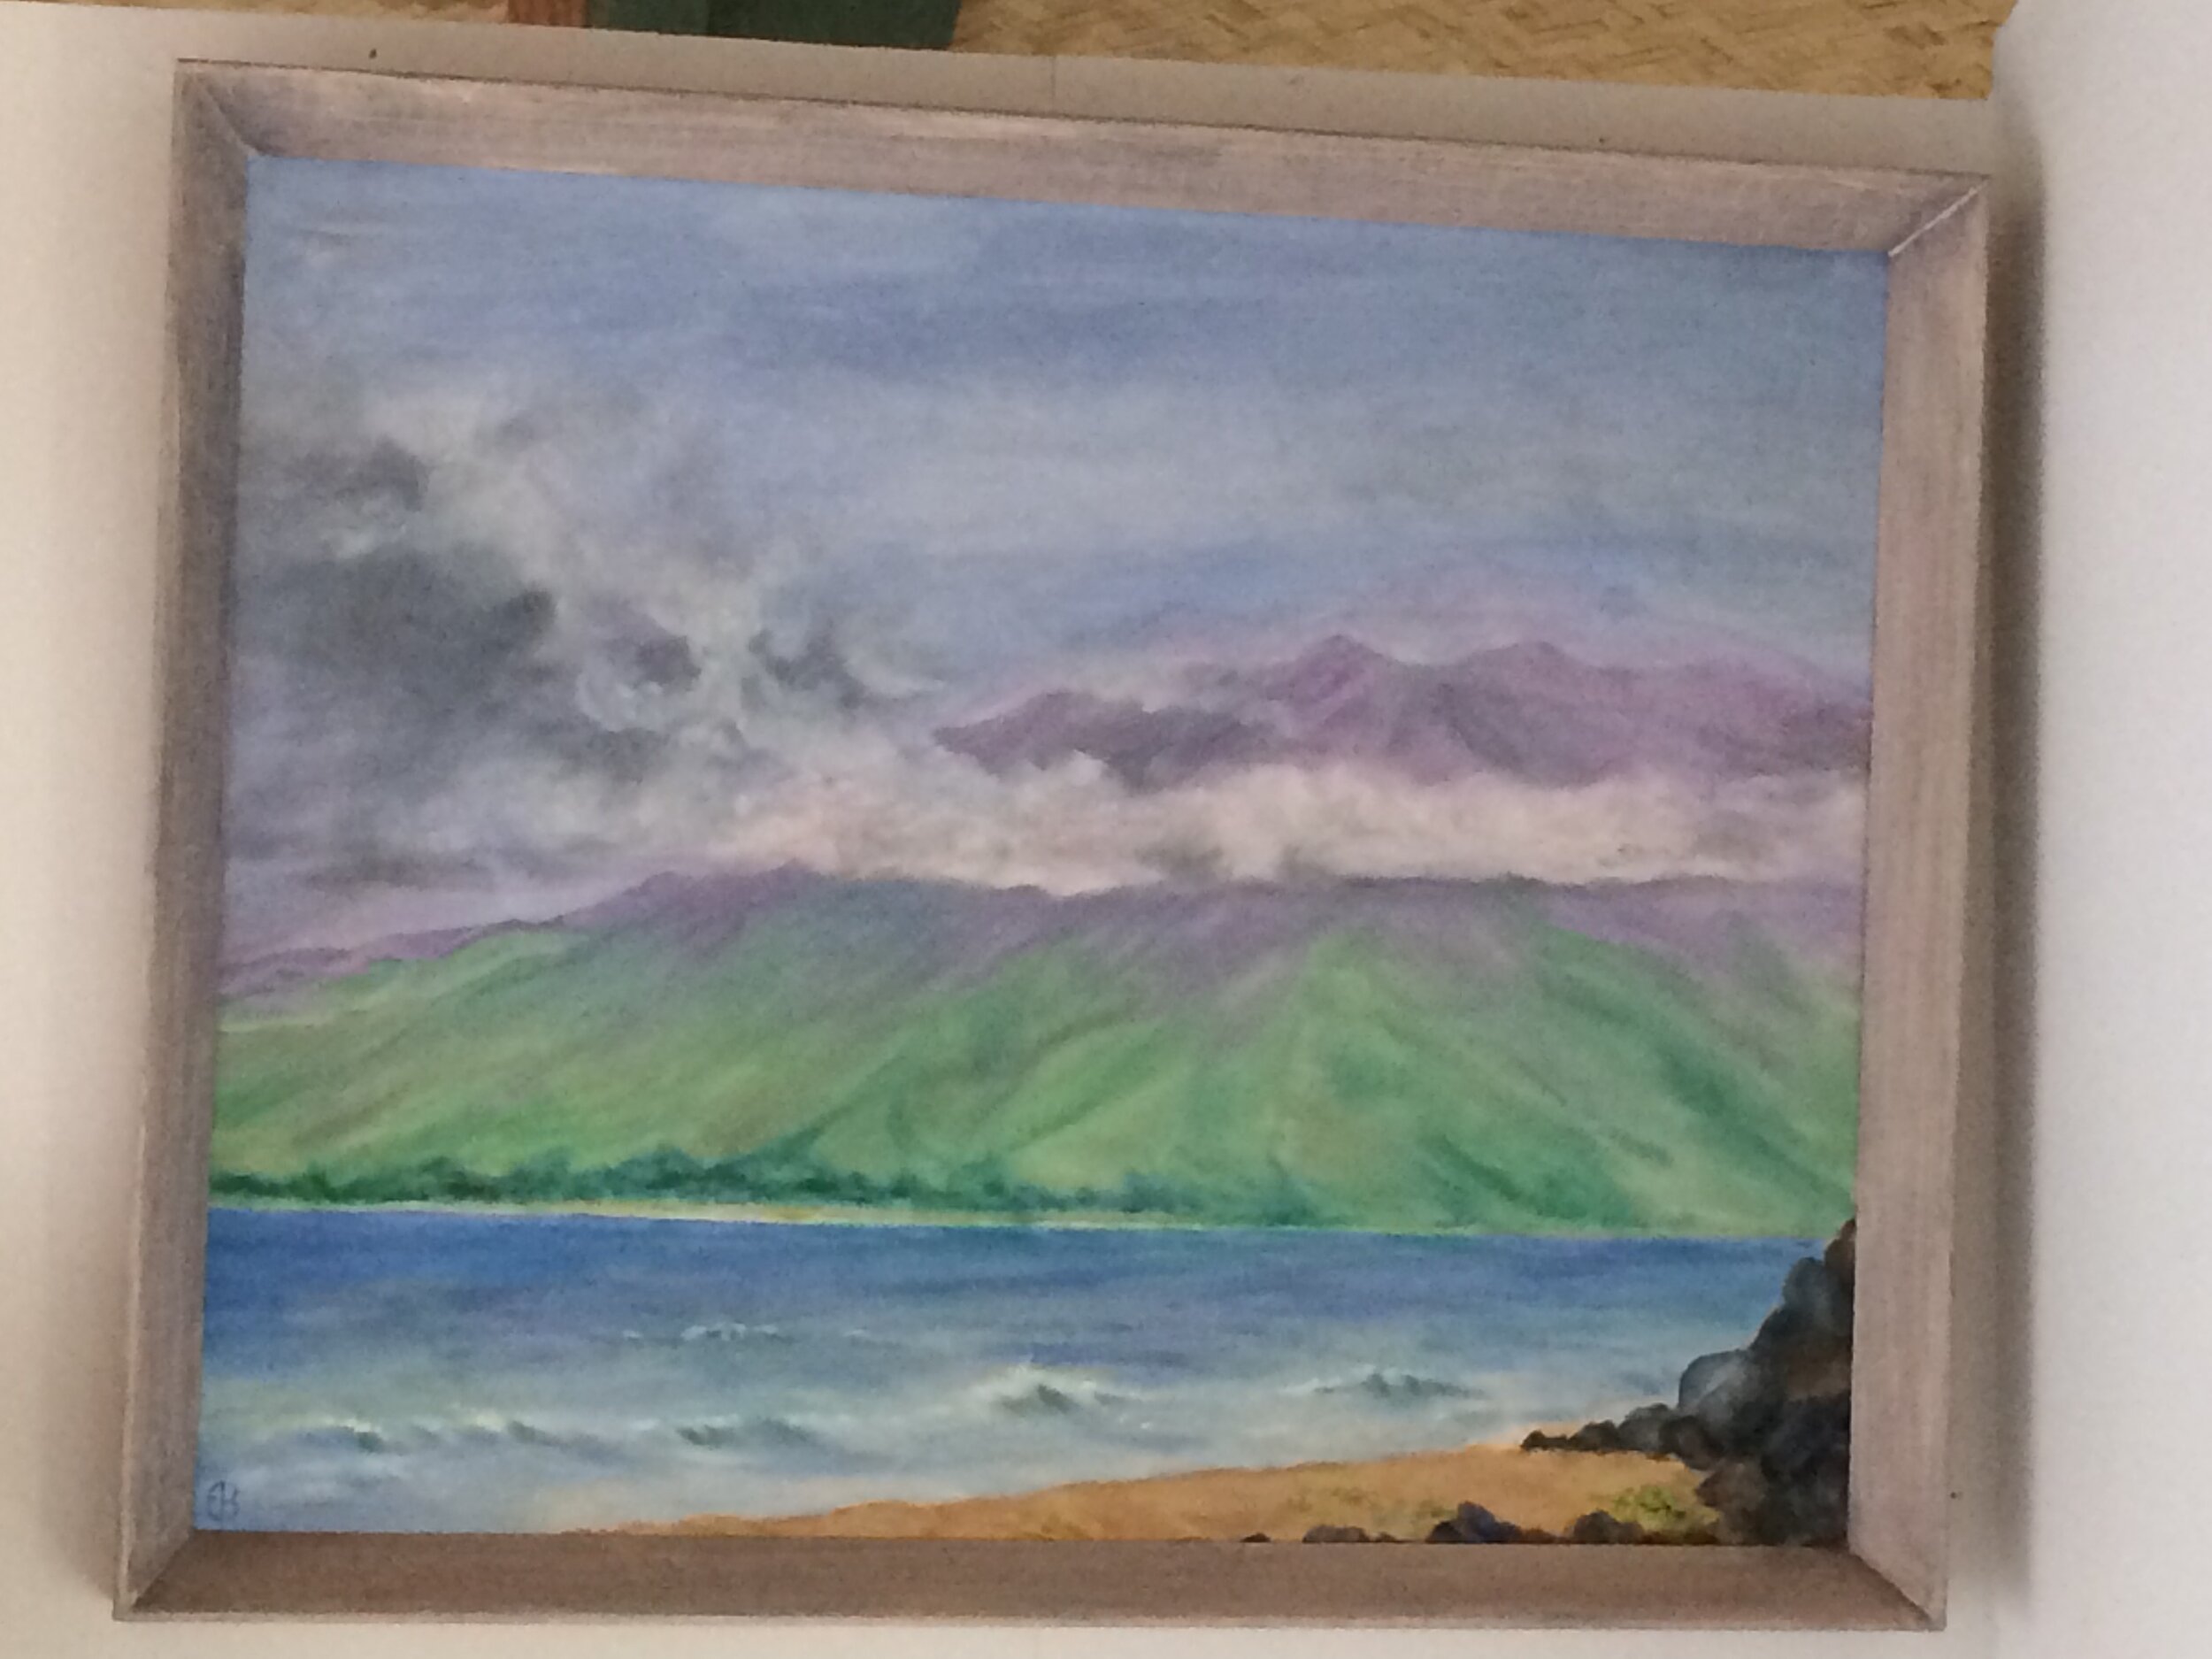  Painting of West Maui  